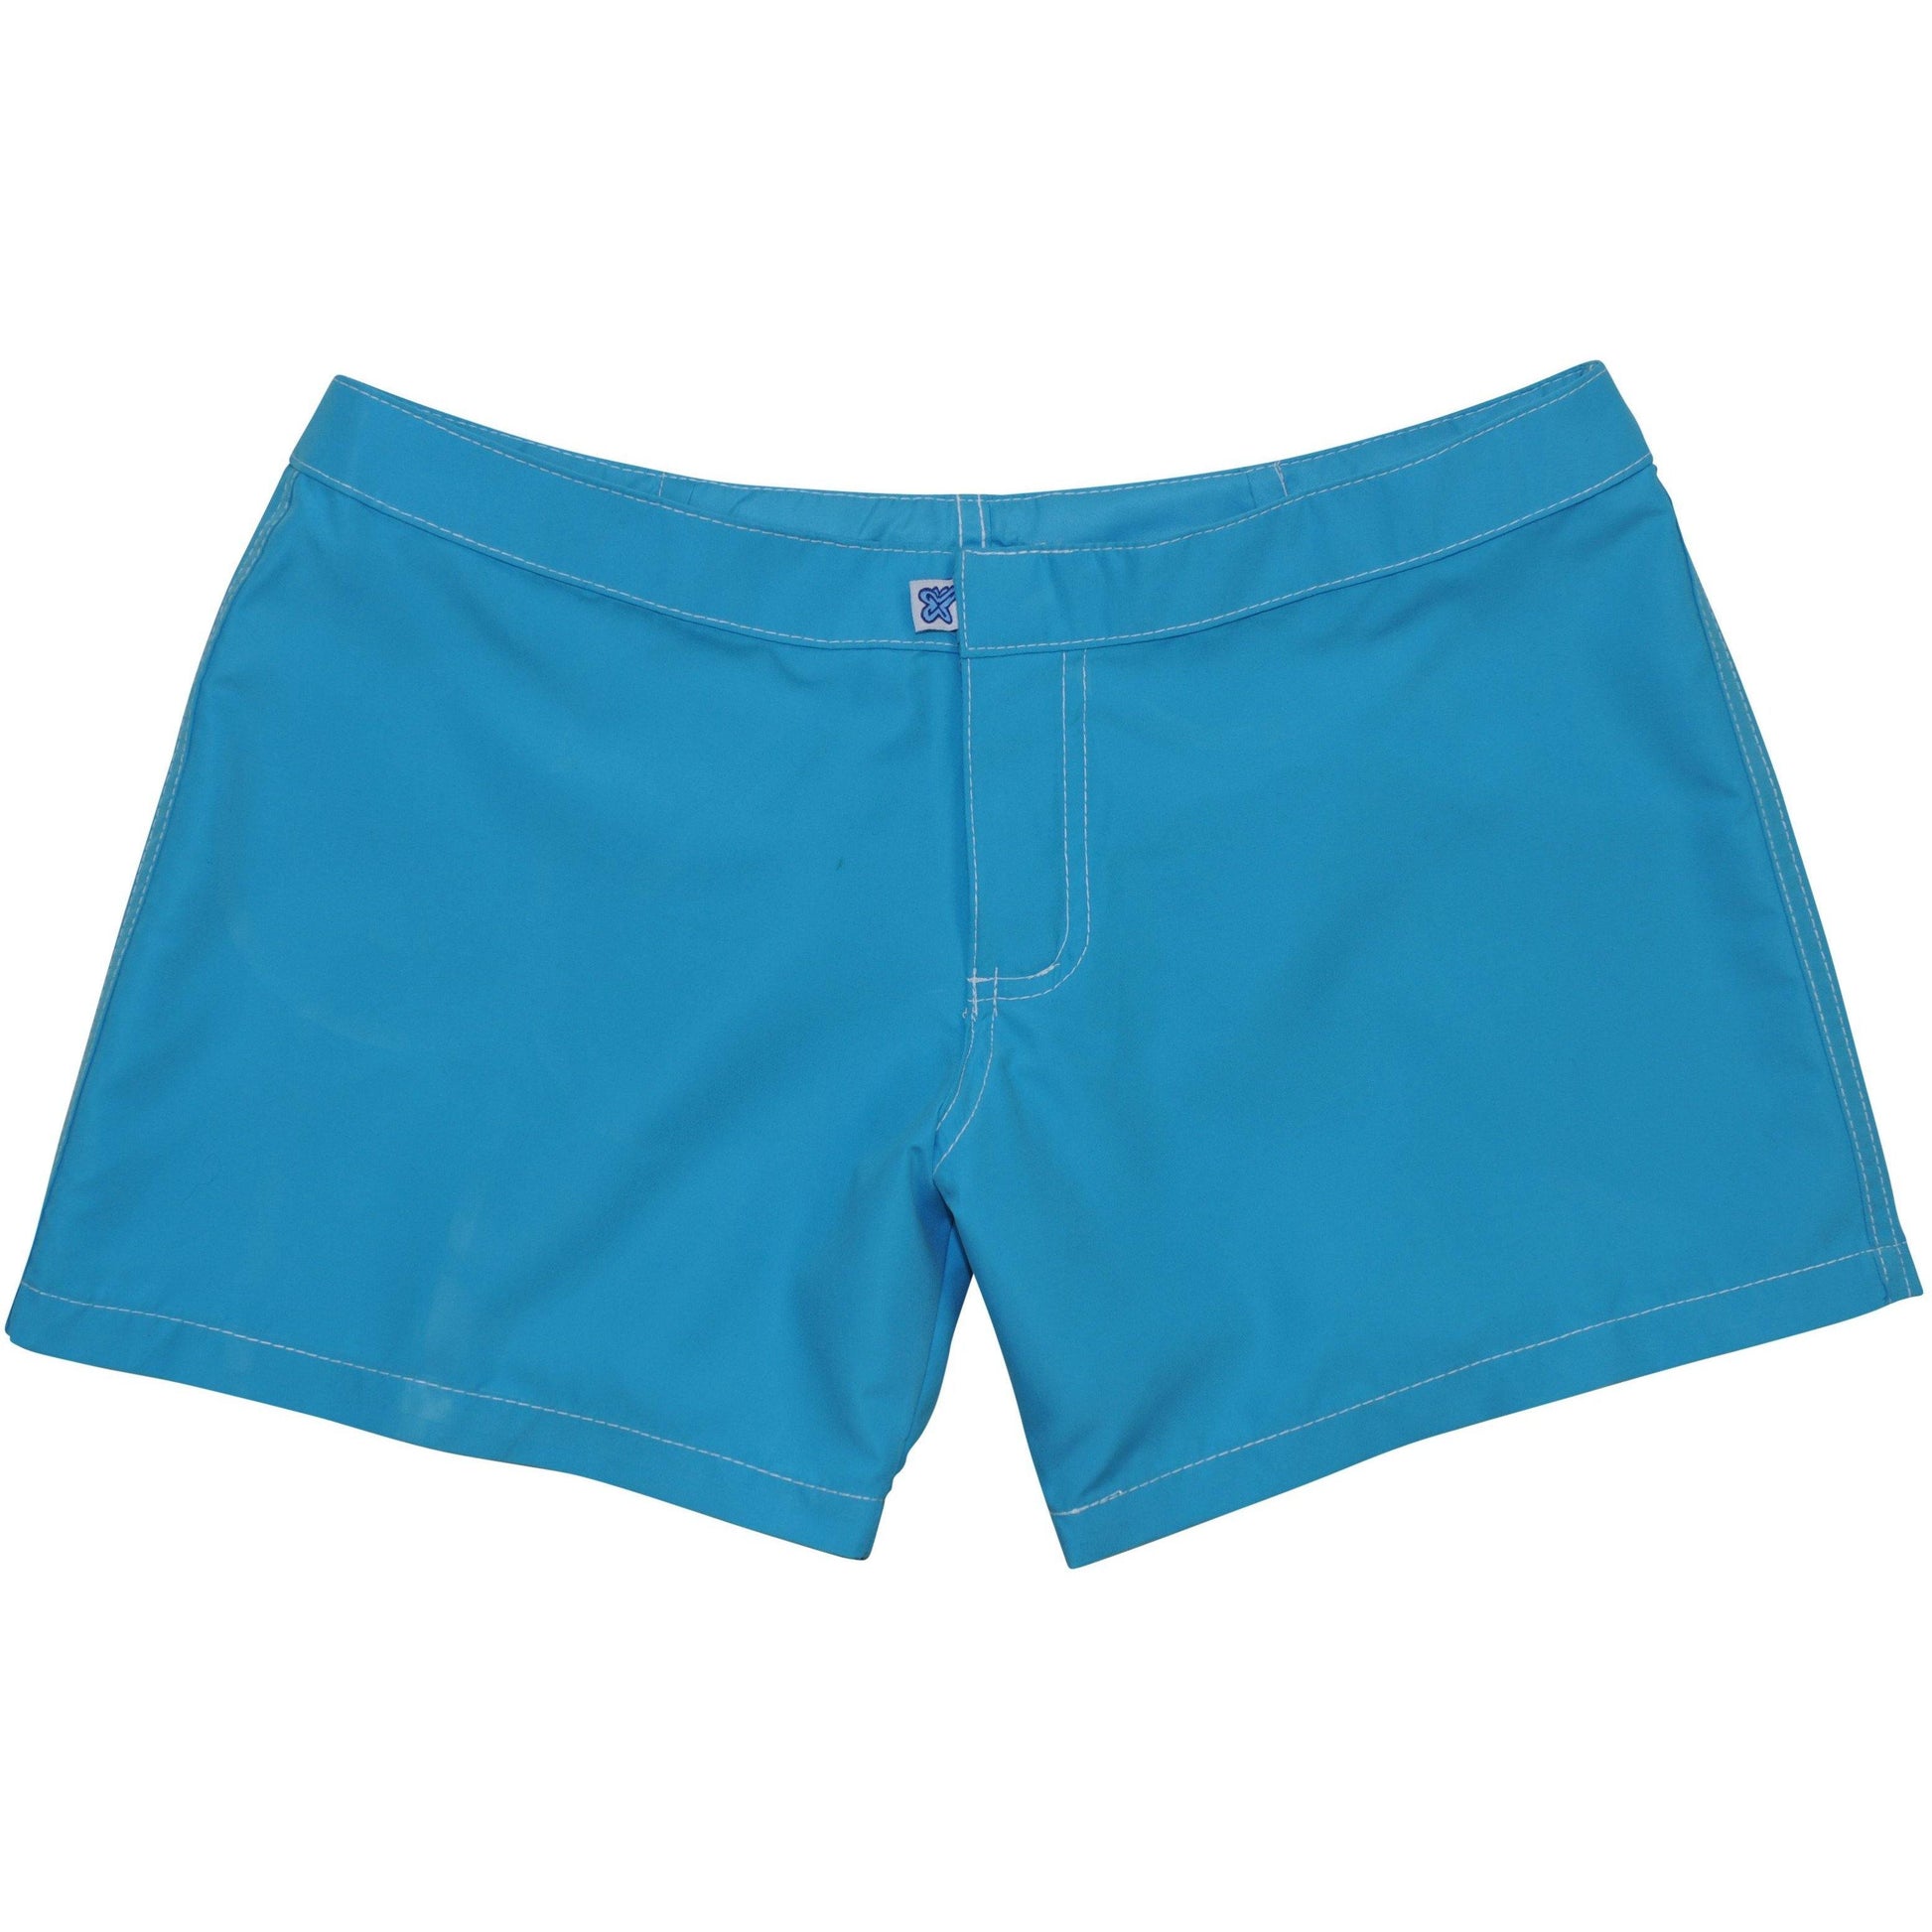 ***NEW*** "A Solid Color" Women's (Swim) Board Shorts - Lower Rise / 4" Inseam (Turquoise) - Board Shorts World